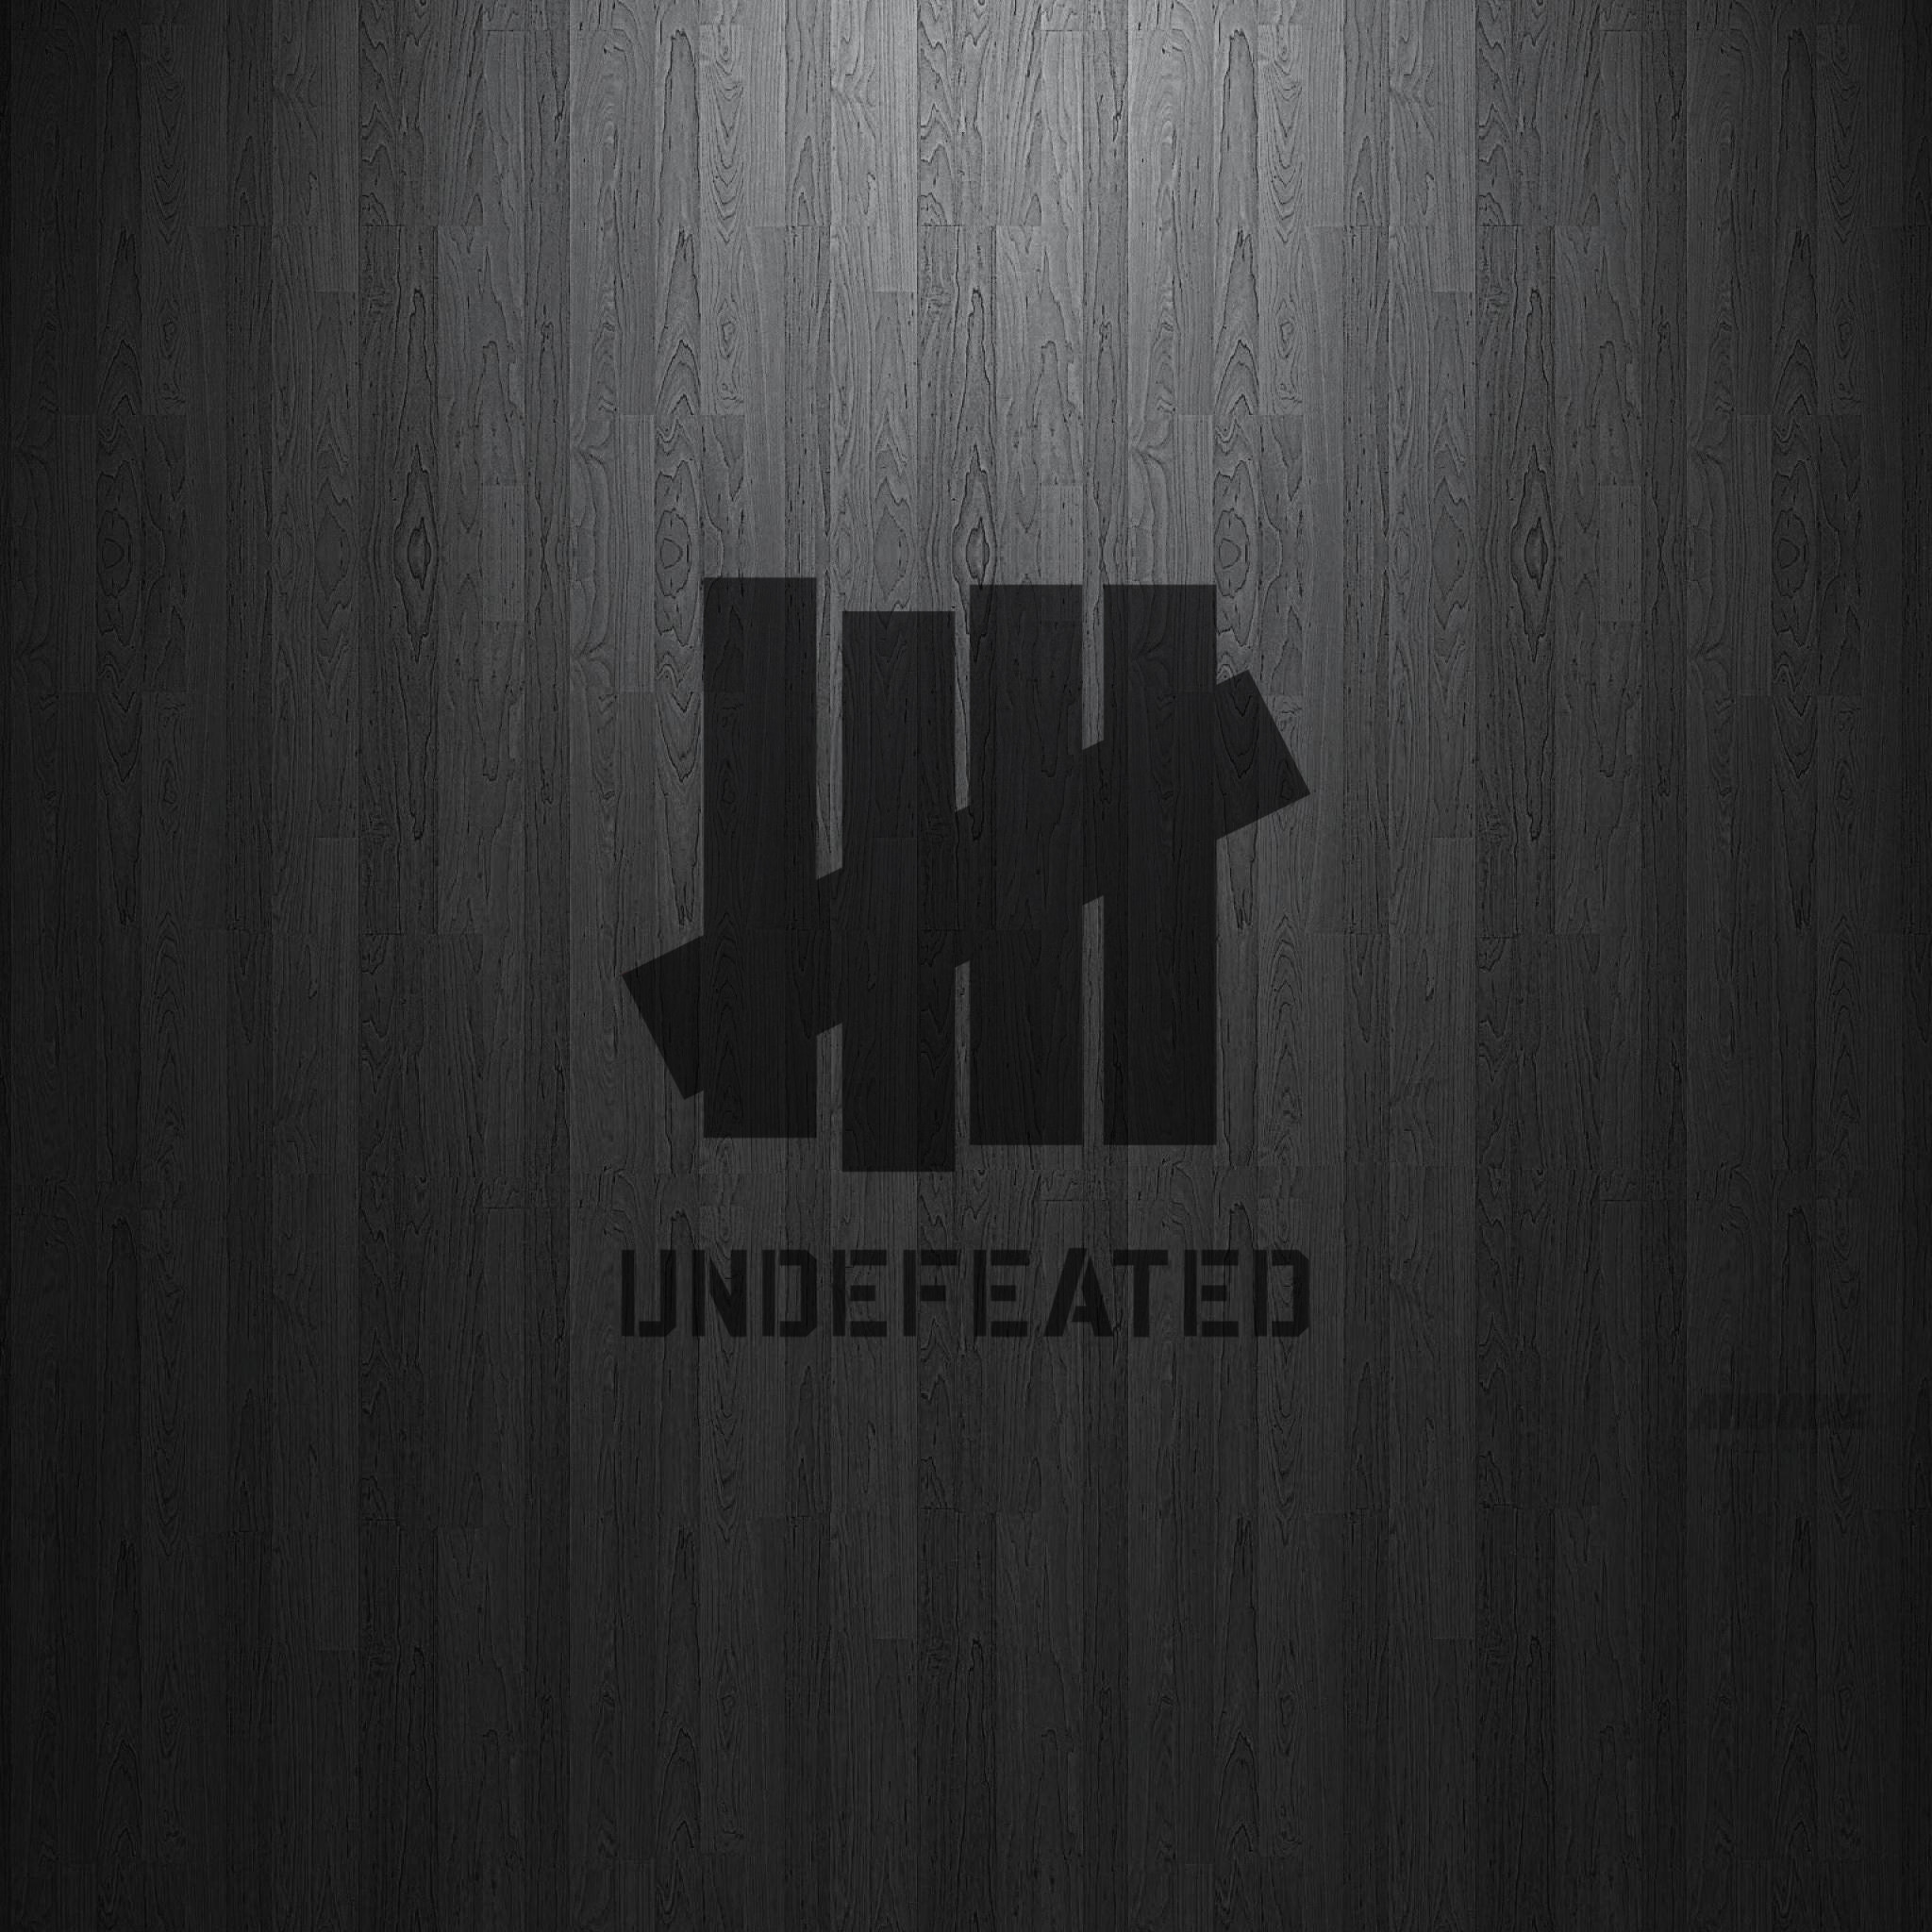 undefeated iphone wallpaper - all the Gallery you need! | iPad ...